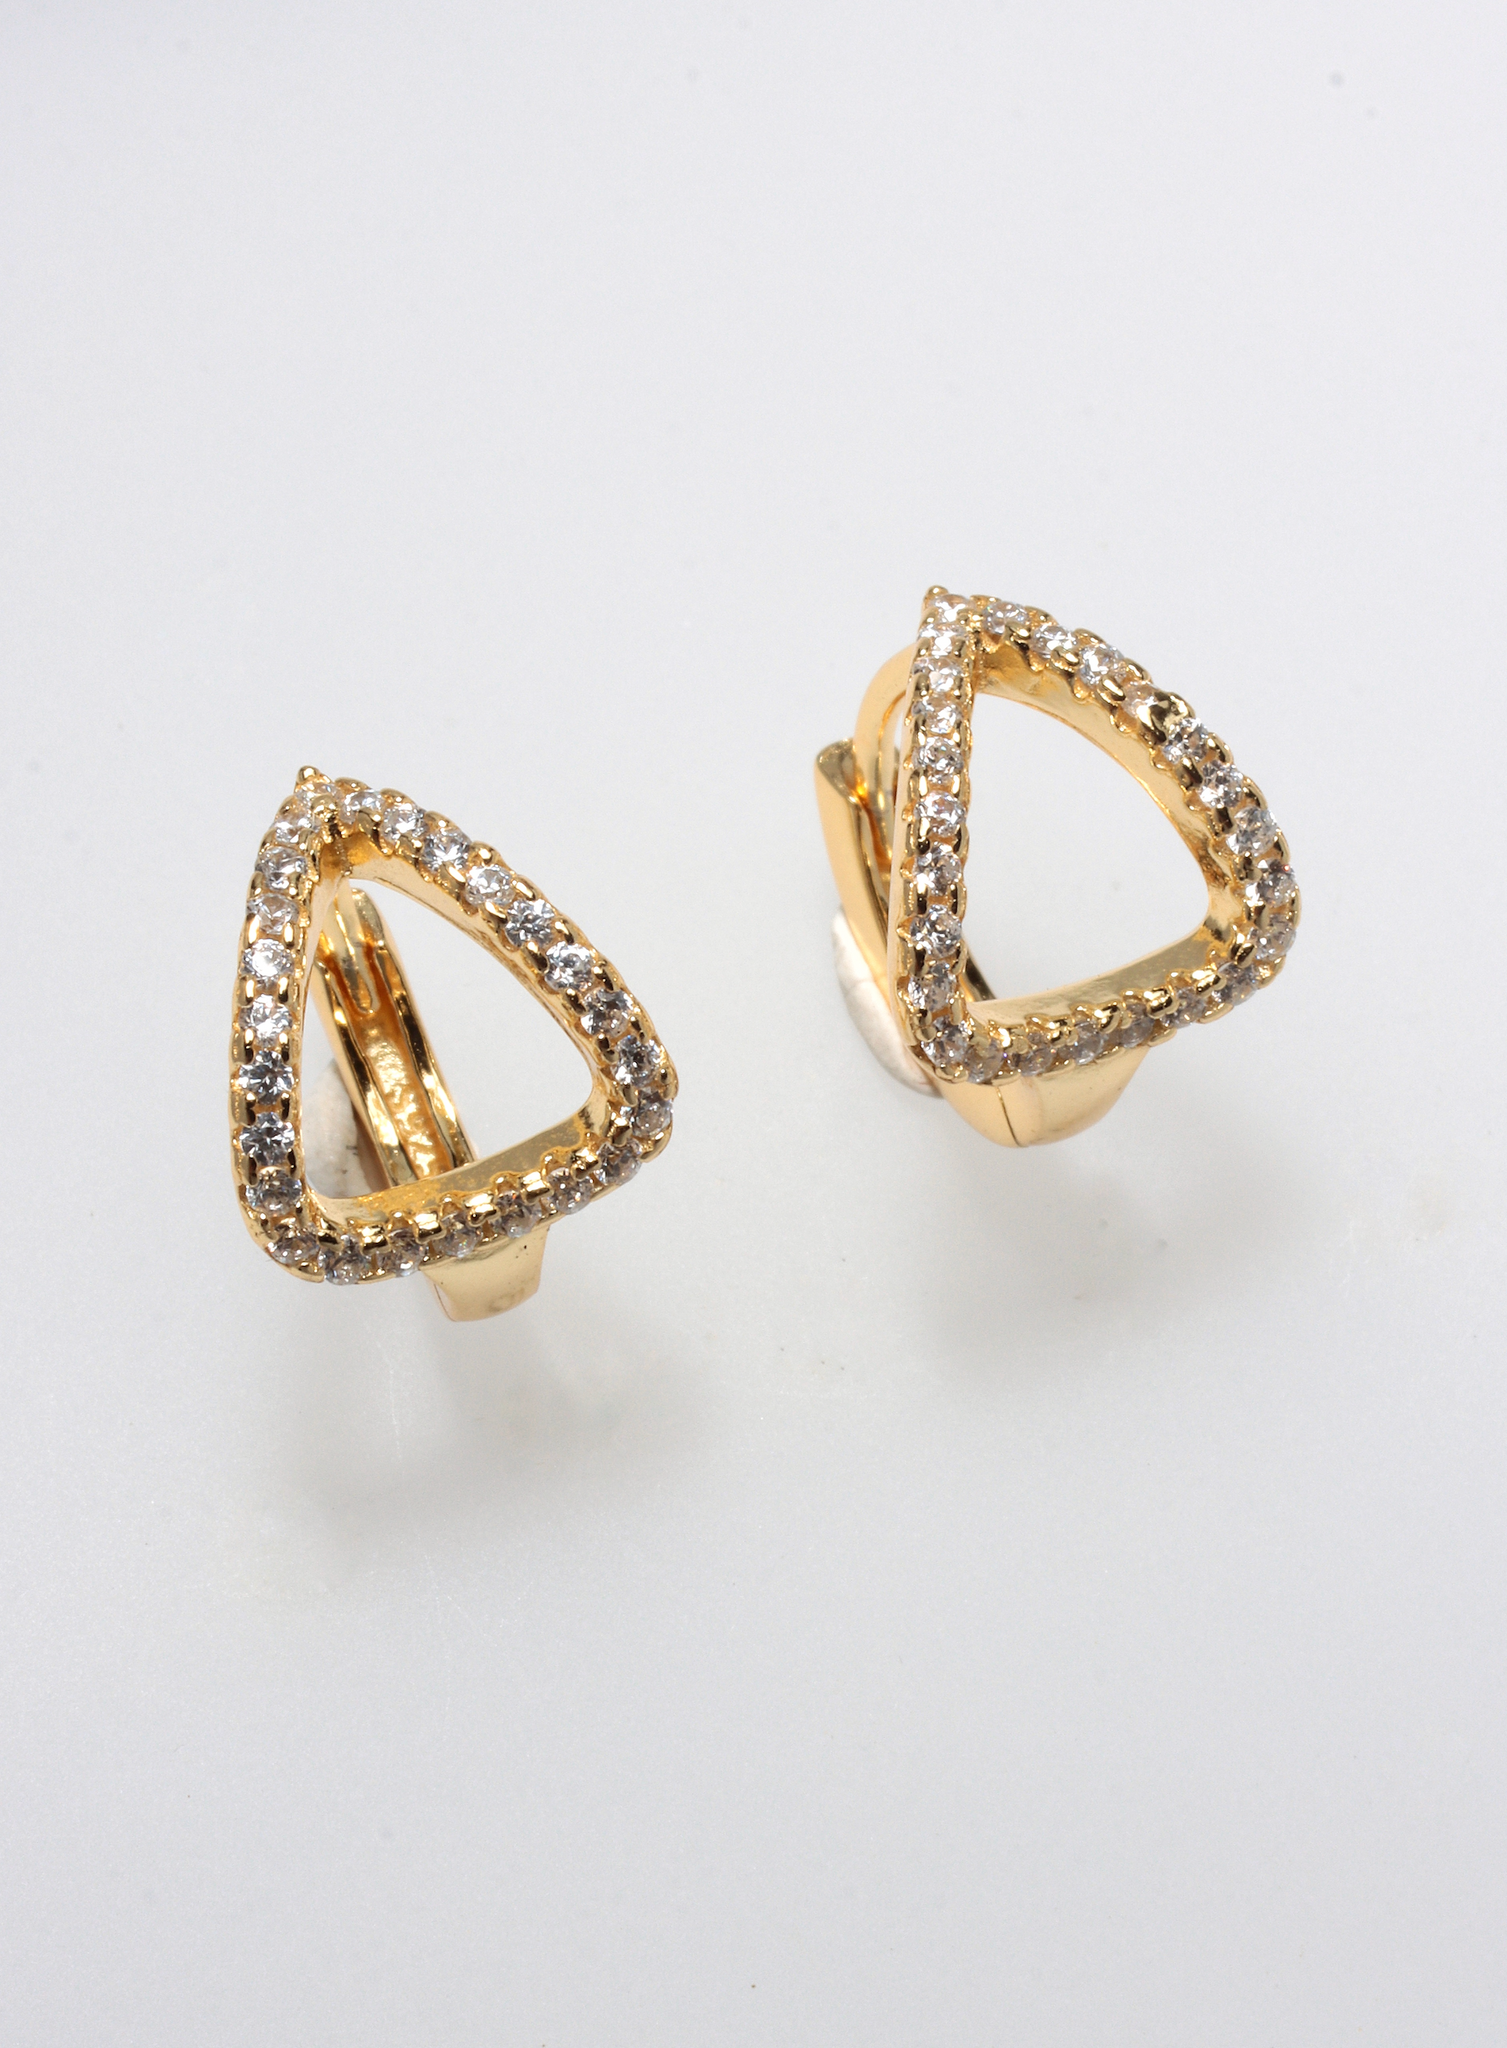 PAVE HUGGIE GOLD 925 SILVER EARRINGS BY ANITA BRAND